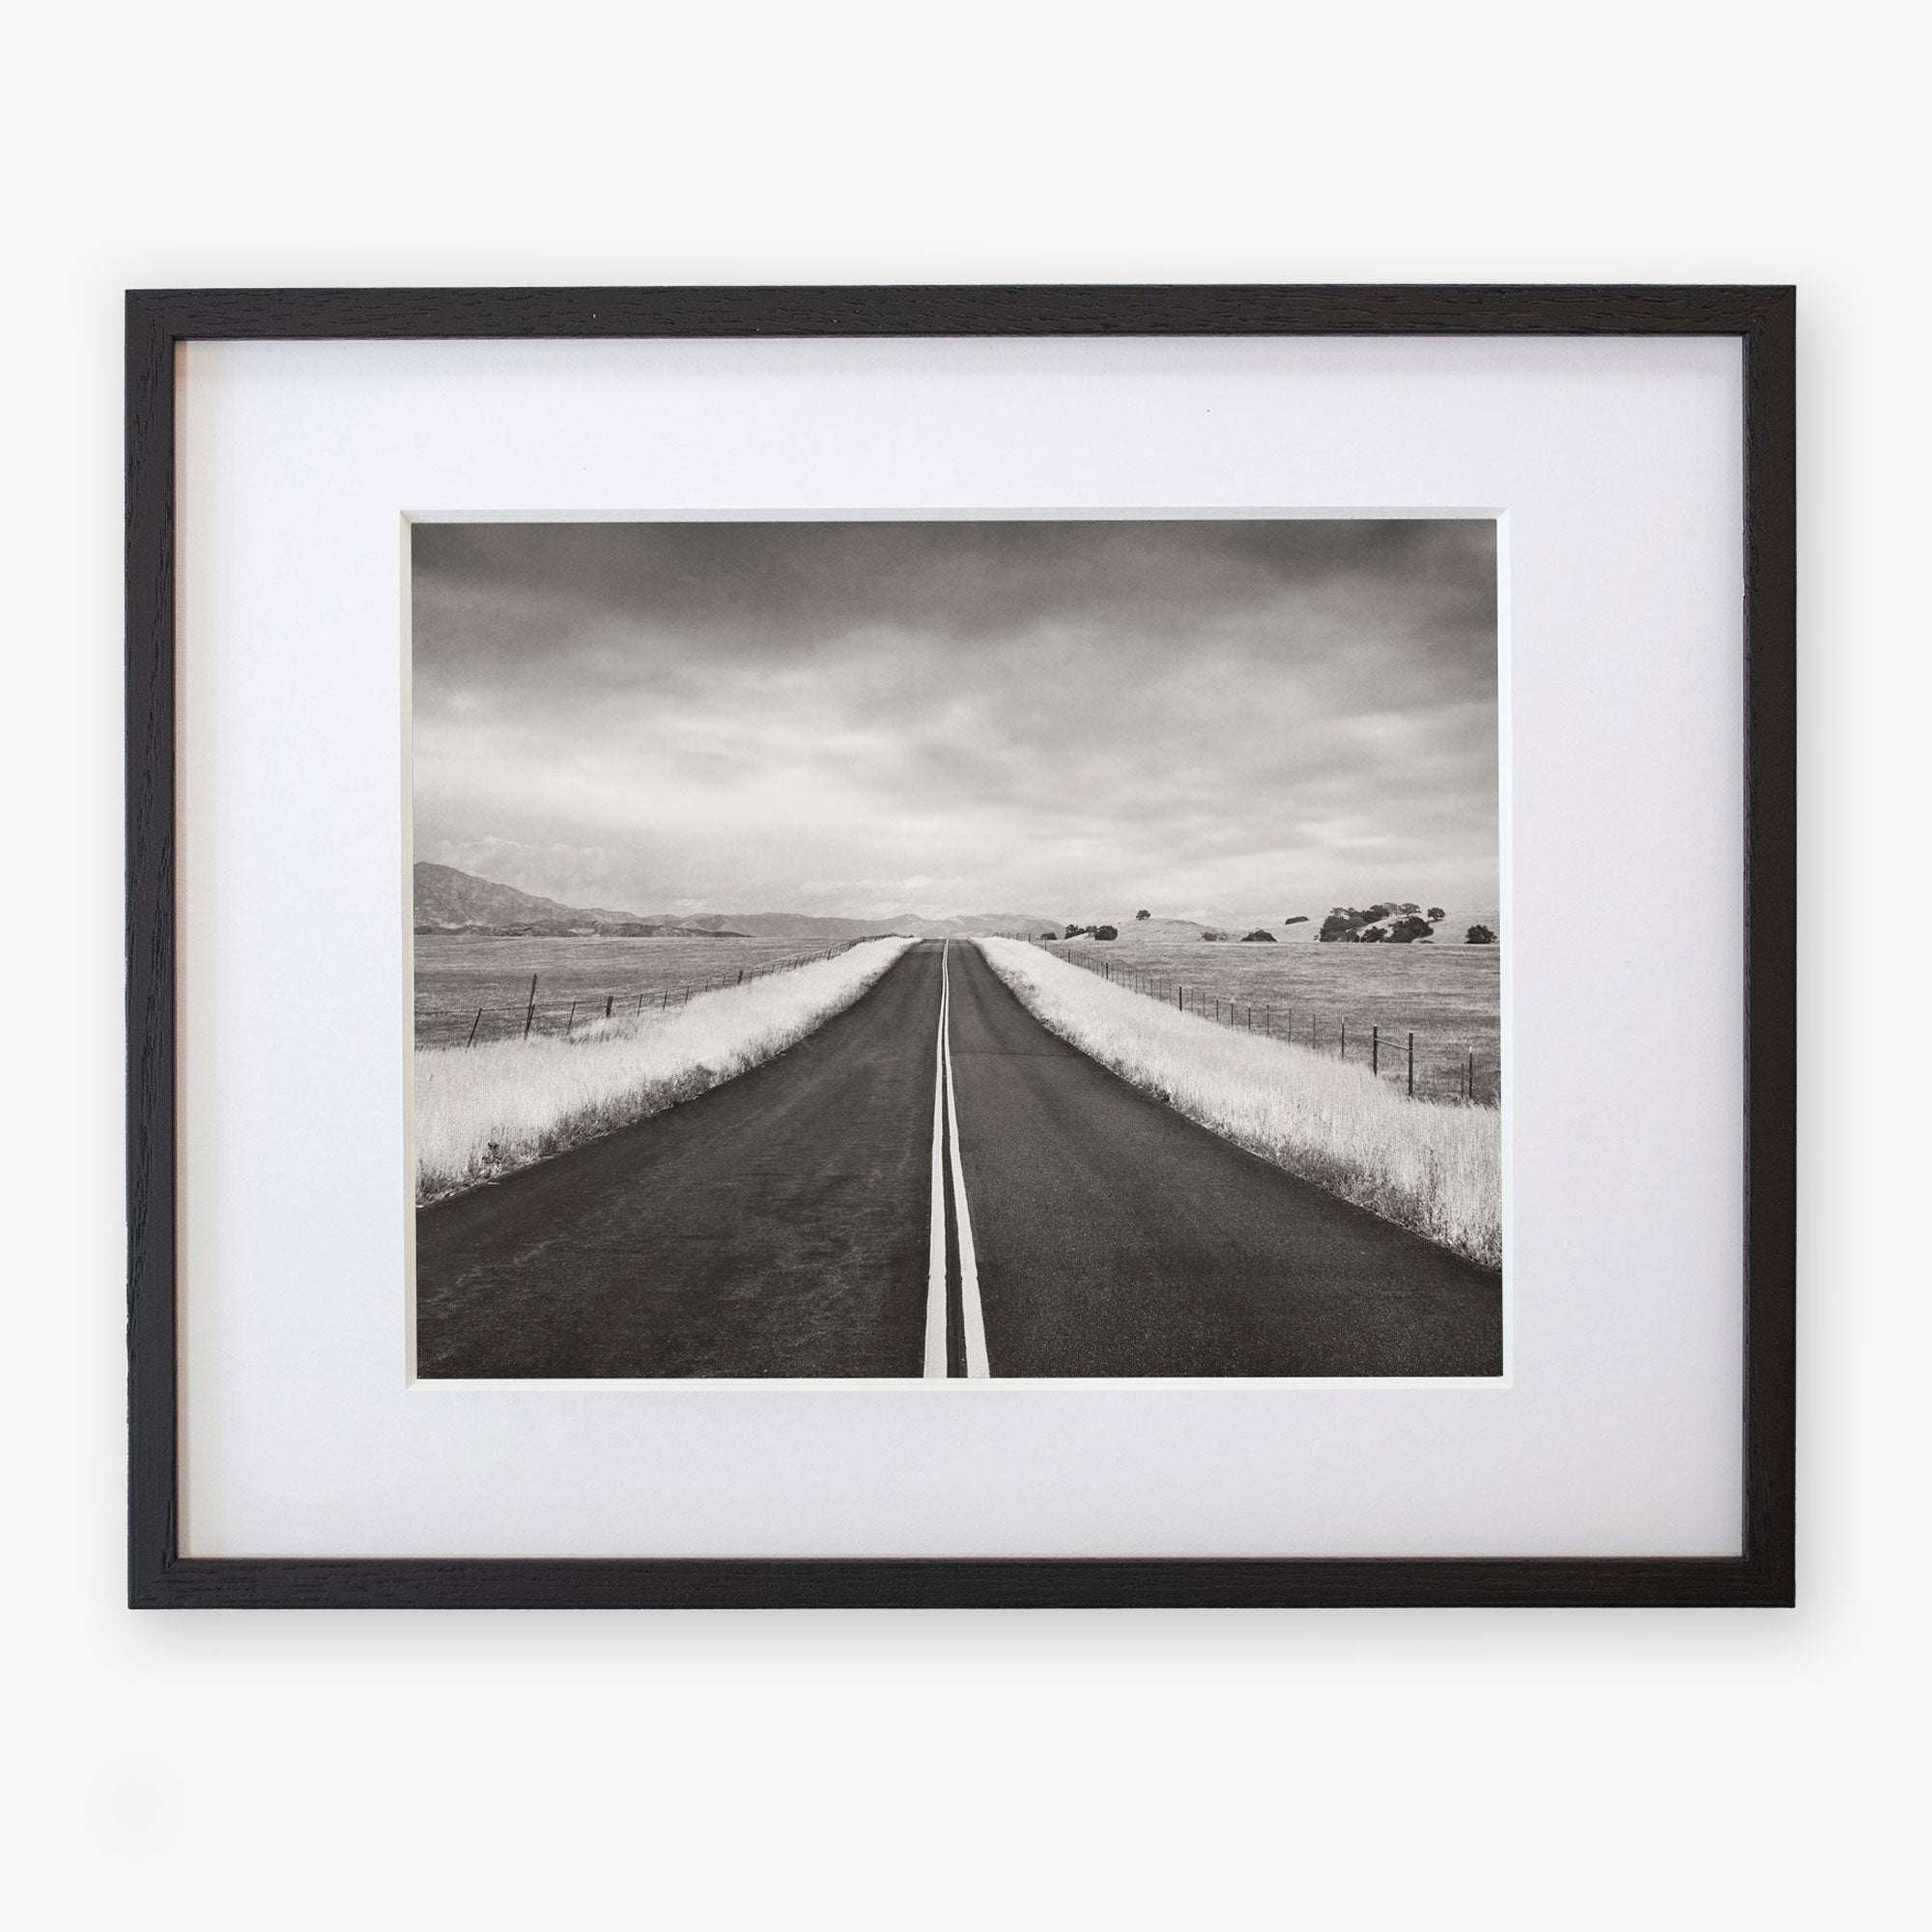 A framed Offley Green black and white photograph of a straight road stretching into the distance through a rural landscape, with grassy fields and scattered trees under a cloudy sky, printed on archival photographic paper.